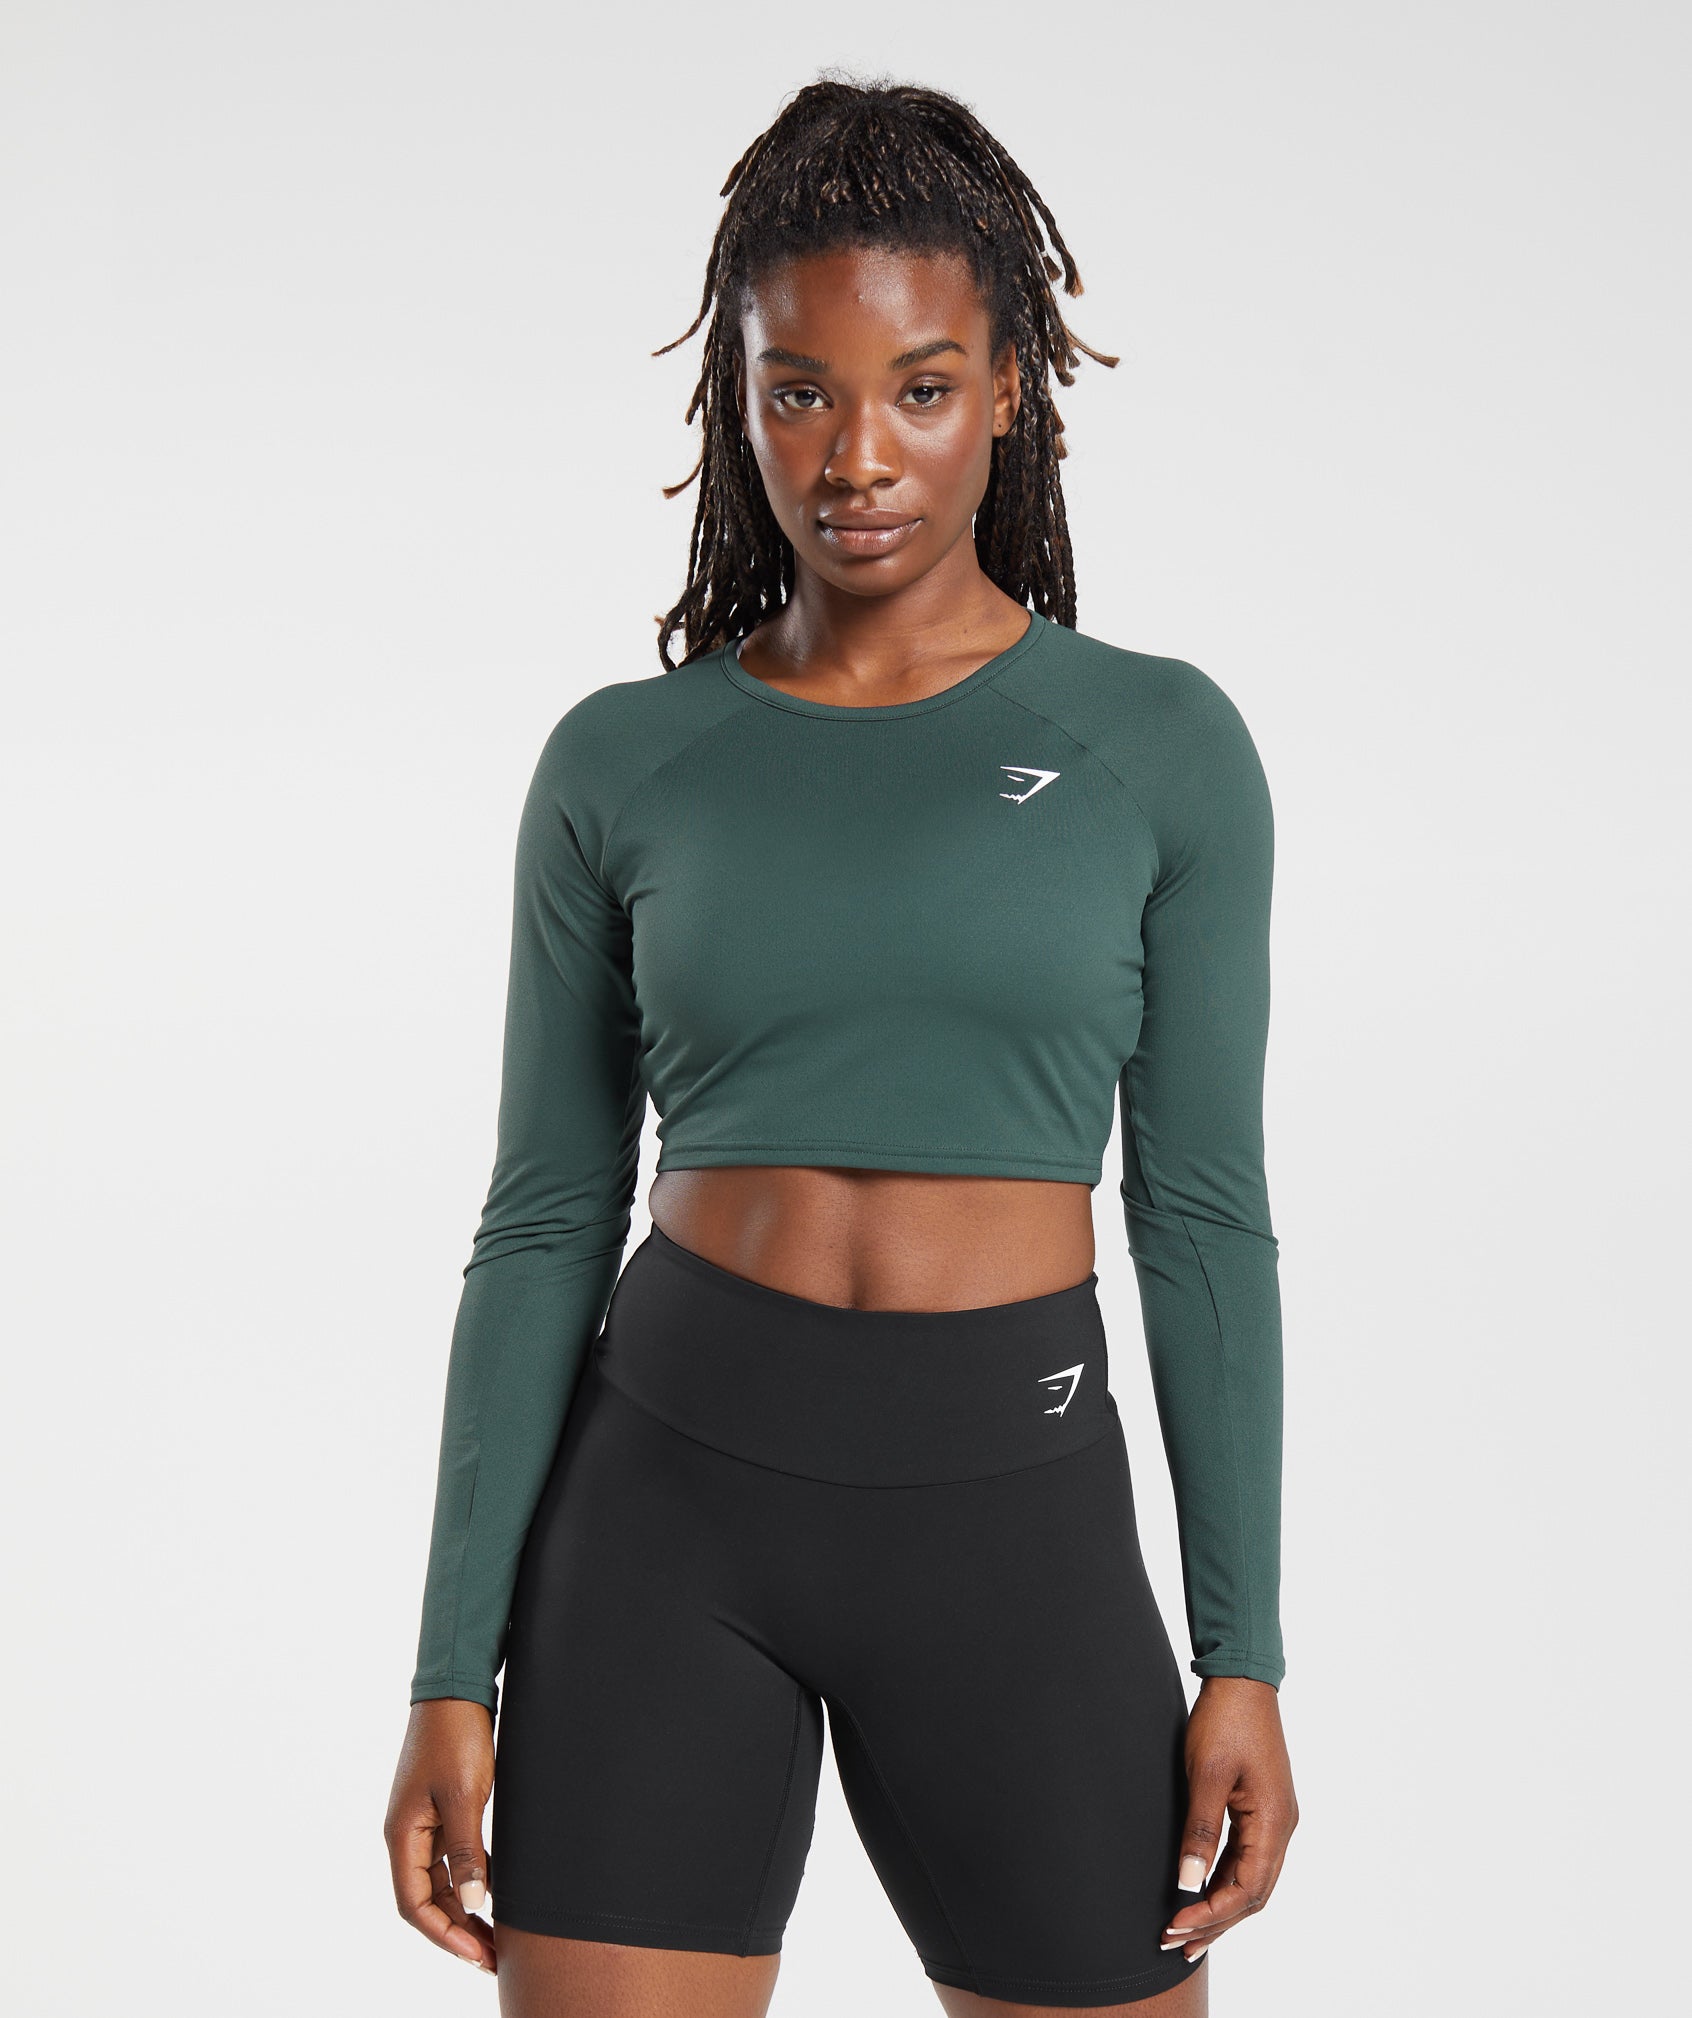 Zip Up Crop Top w/ Recycled Colour Block - Sports Top - Green